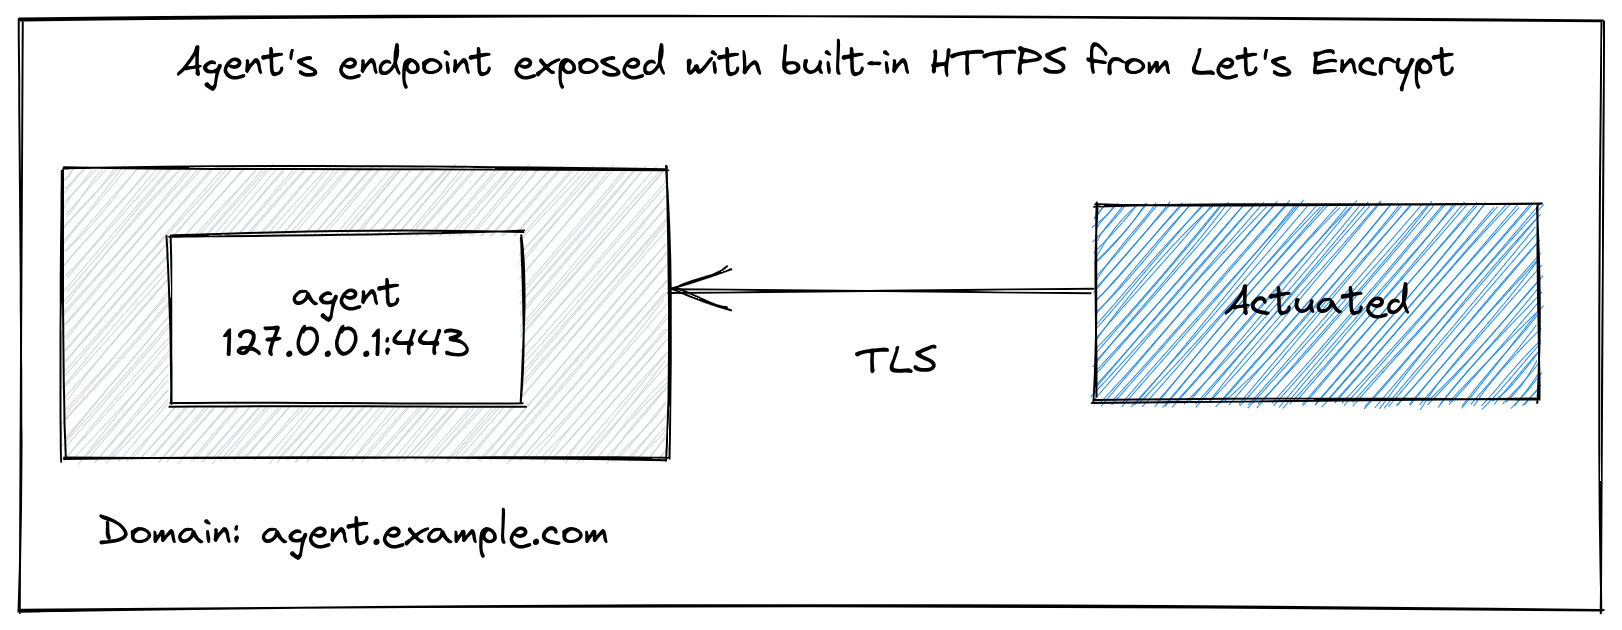 Accessing the agent's endpoint built-in TLS and Let's Encrypt